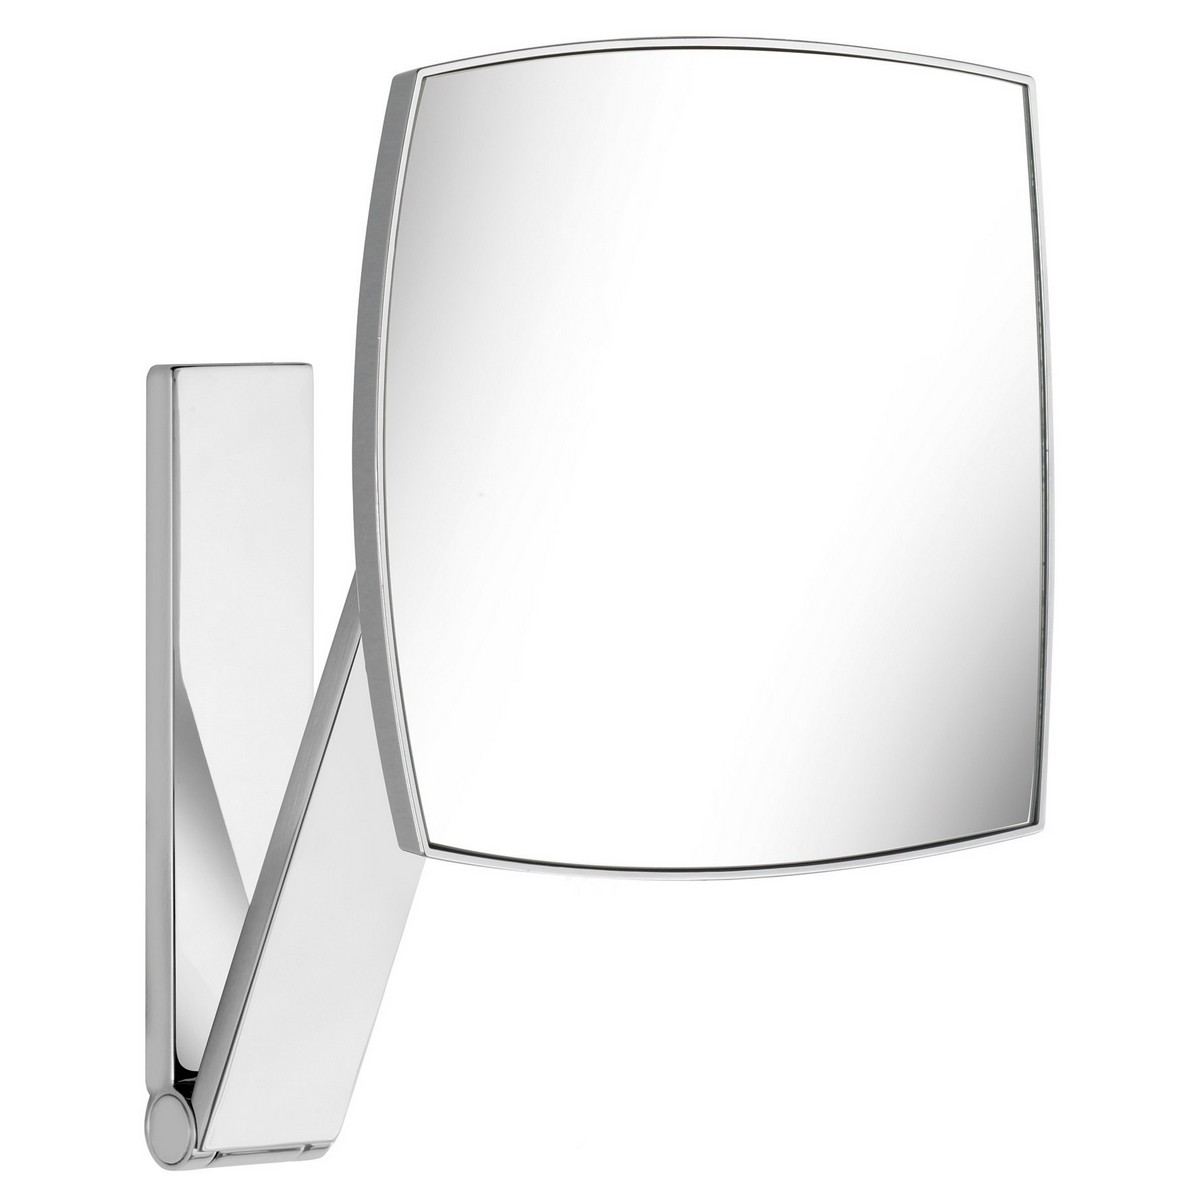 KEUCO 176130000 ILOOK MOVE 7 7/8 INCH WALL MOUNTED FRAMED SQUARE BATHROOM MIRROR